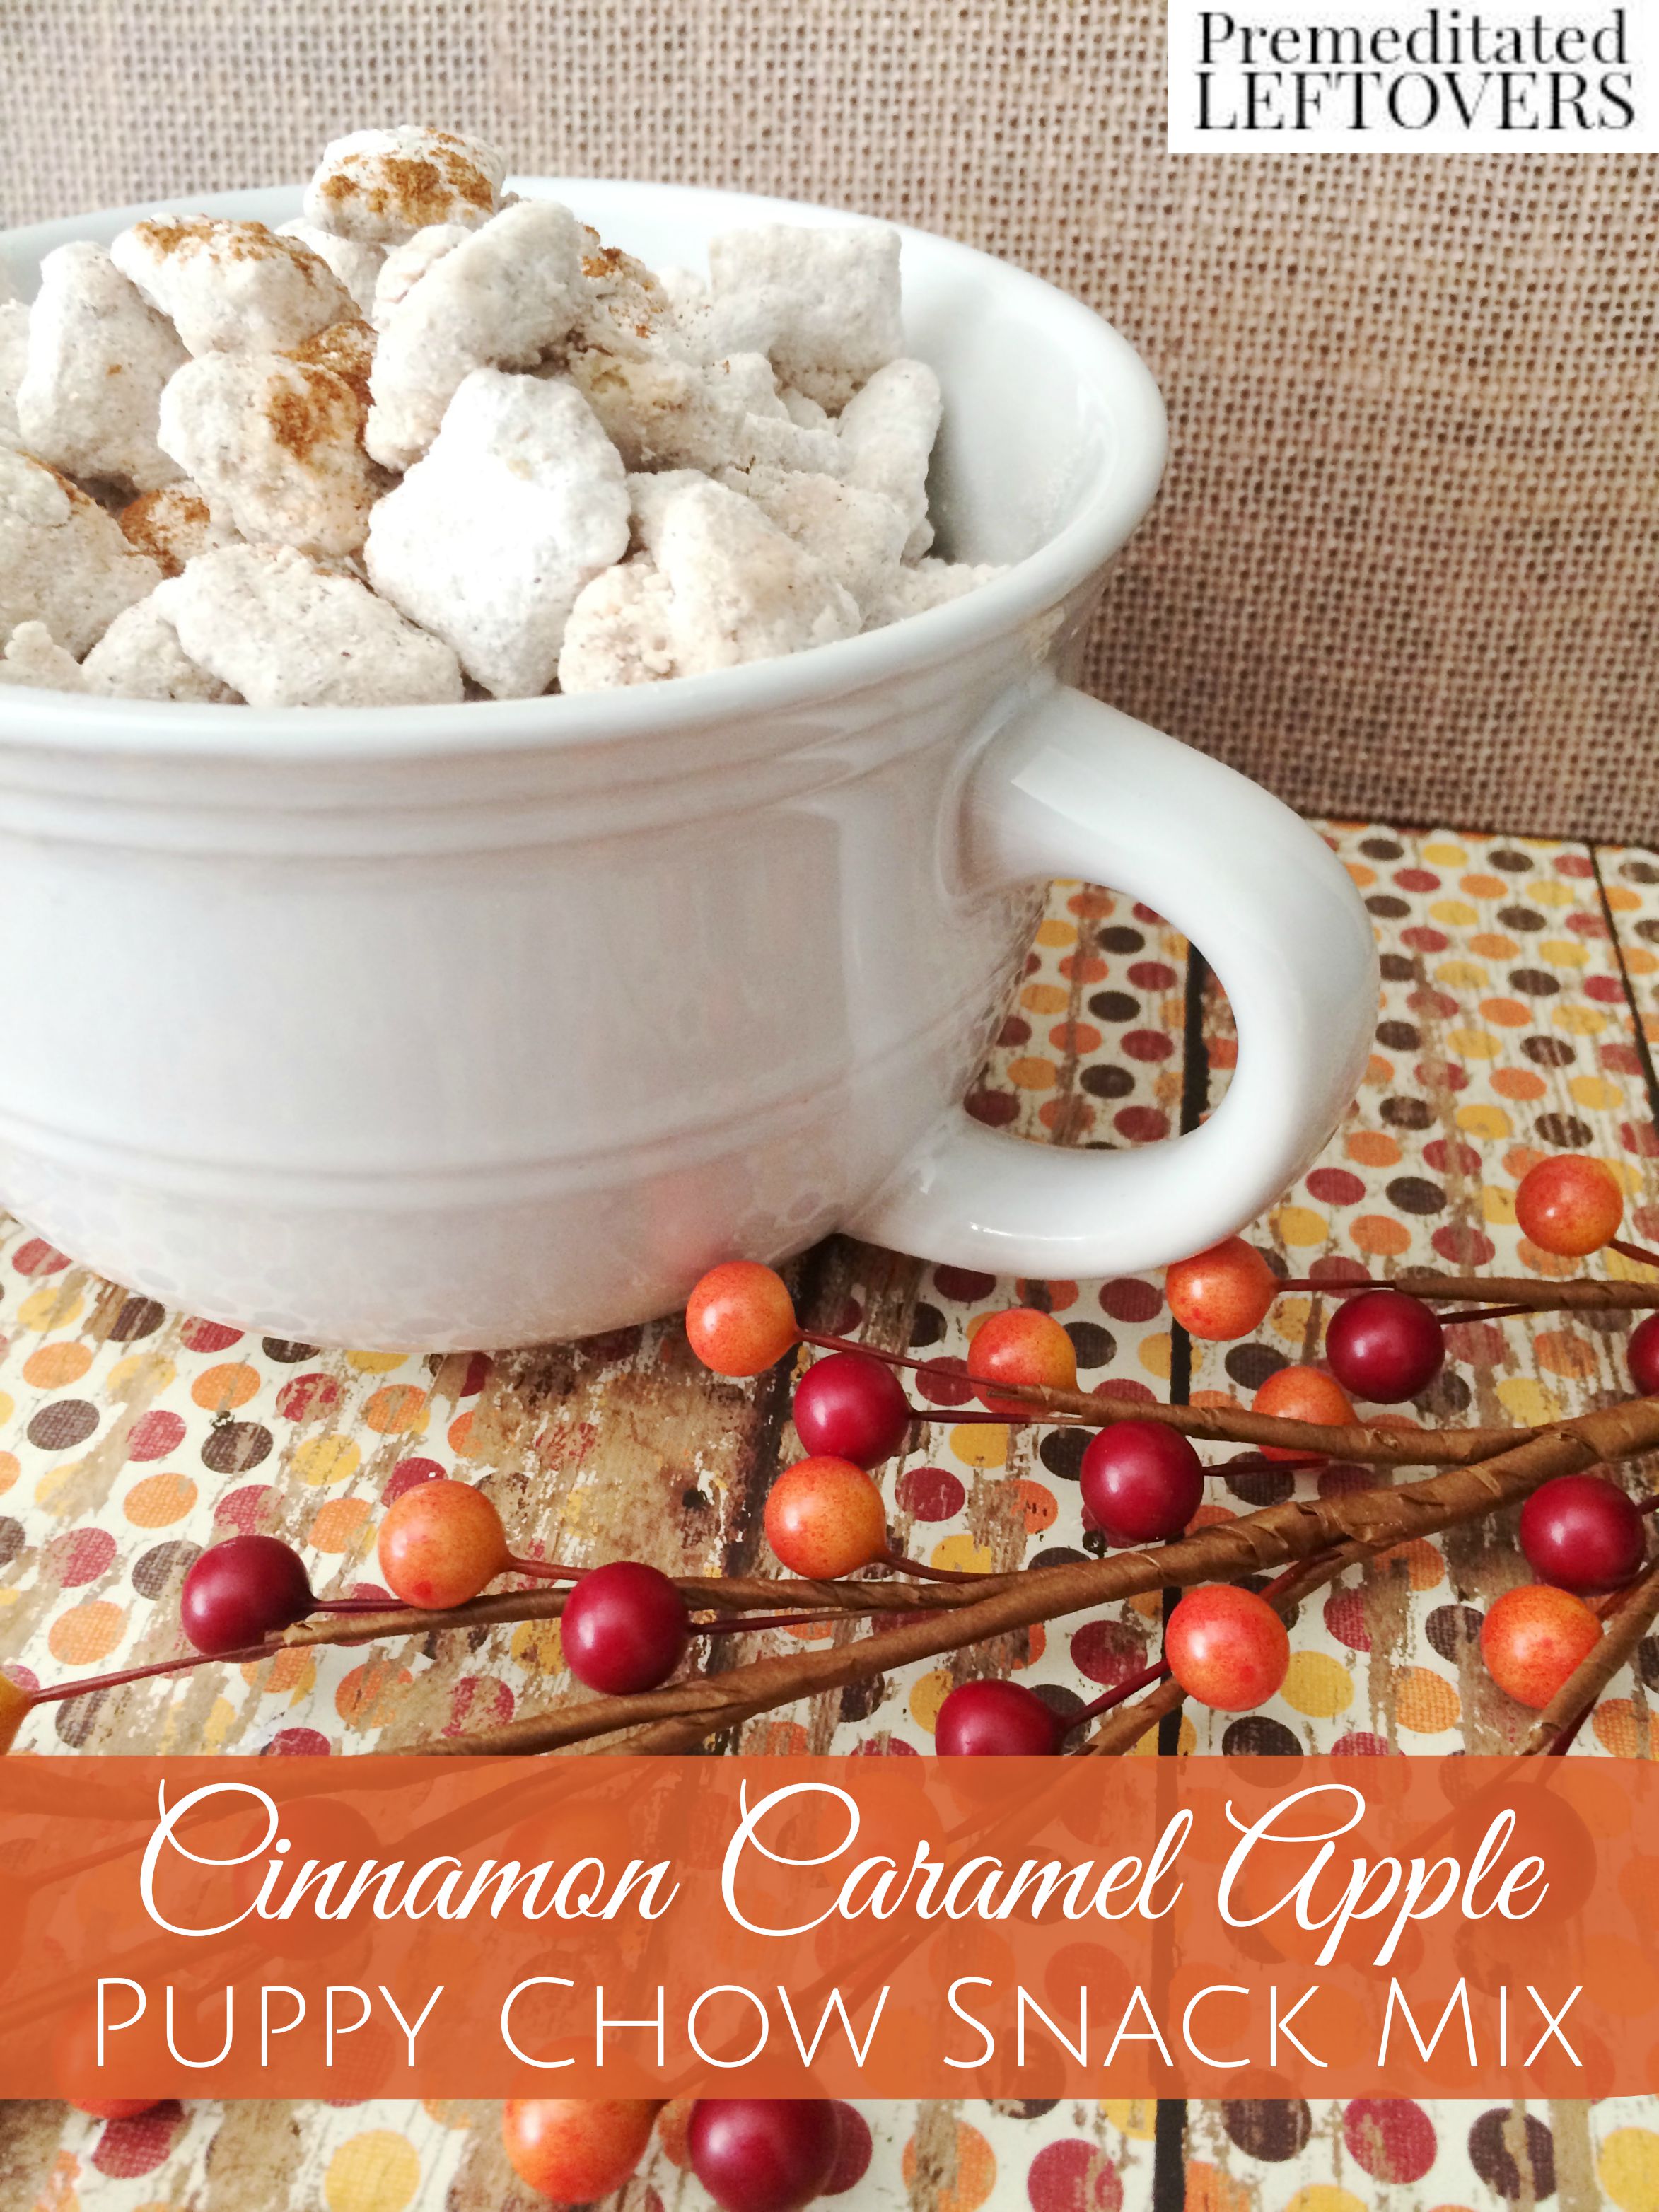 Cinnamon Caramel Apple Puppy Chow Snack Mix Recipe - Enjoy the flavors of cinnamon and caramel apple in this crunchy muddy buddy recipe. Tasty fall snack!